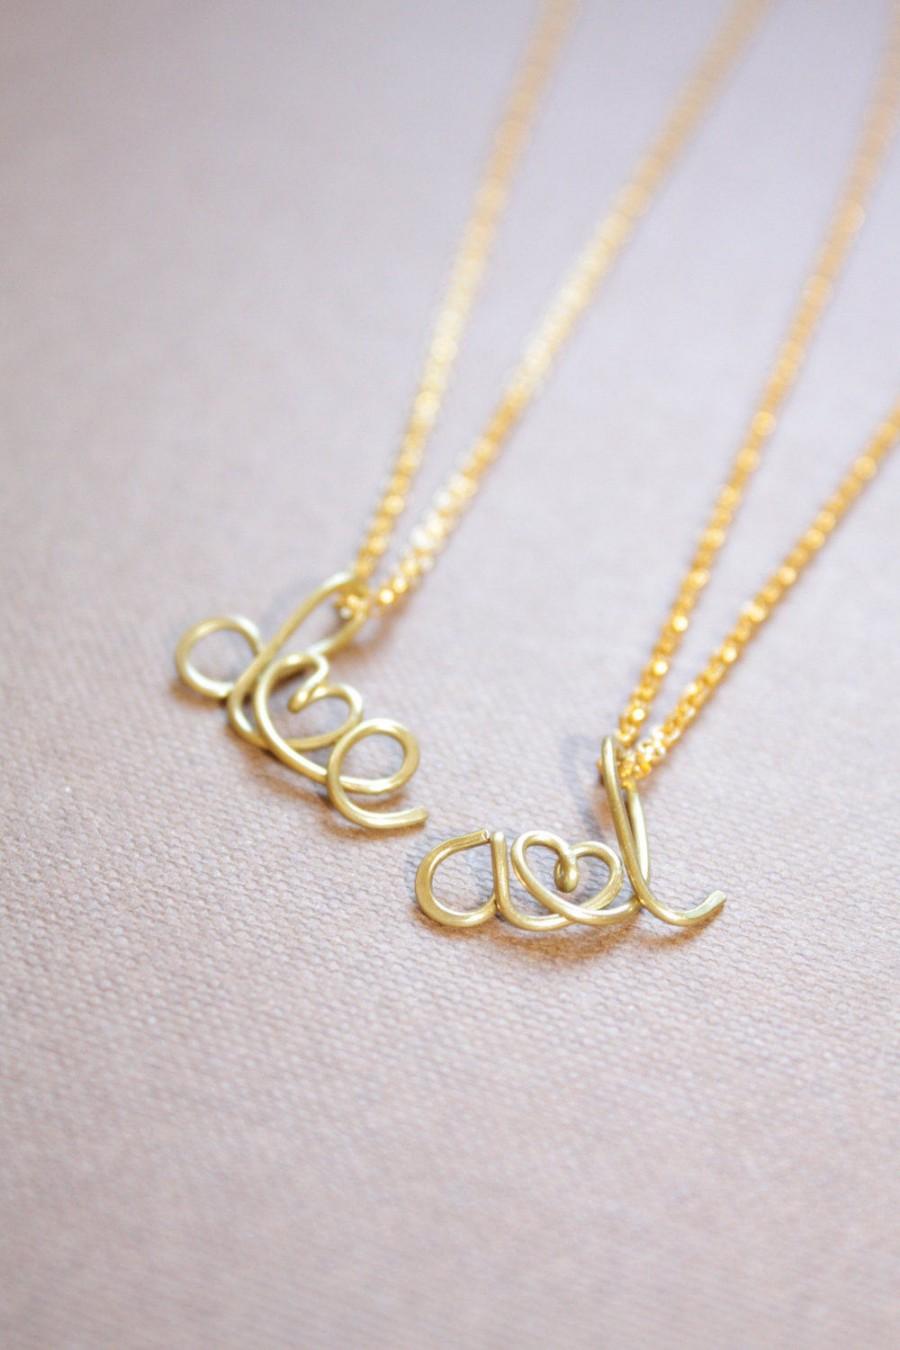 Mariage - Two Lovers Necklace Personalized Engagement Wedding Bridal Shower Anniversary Gift Couples Necklace Two Initials With Heart Letter Necklace